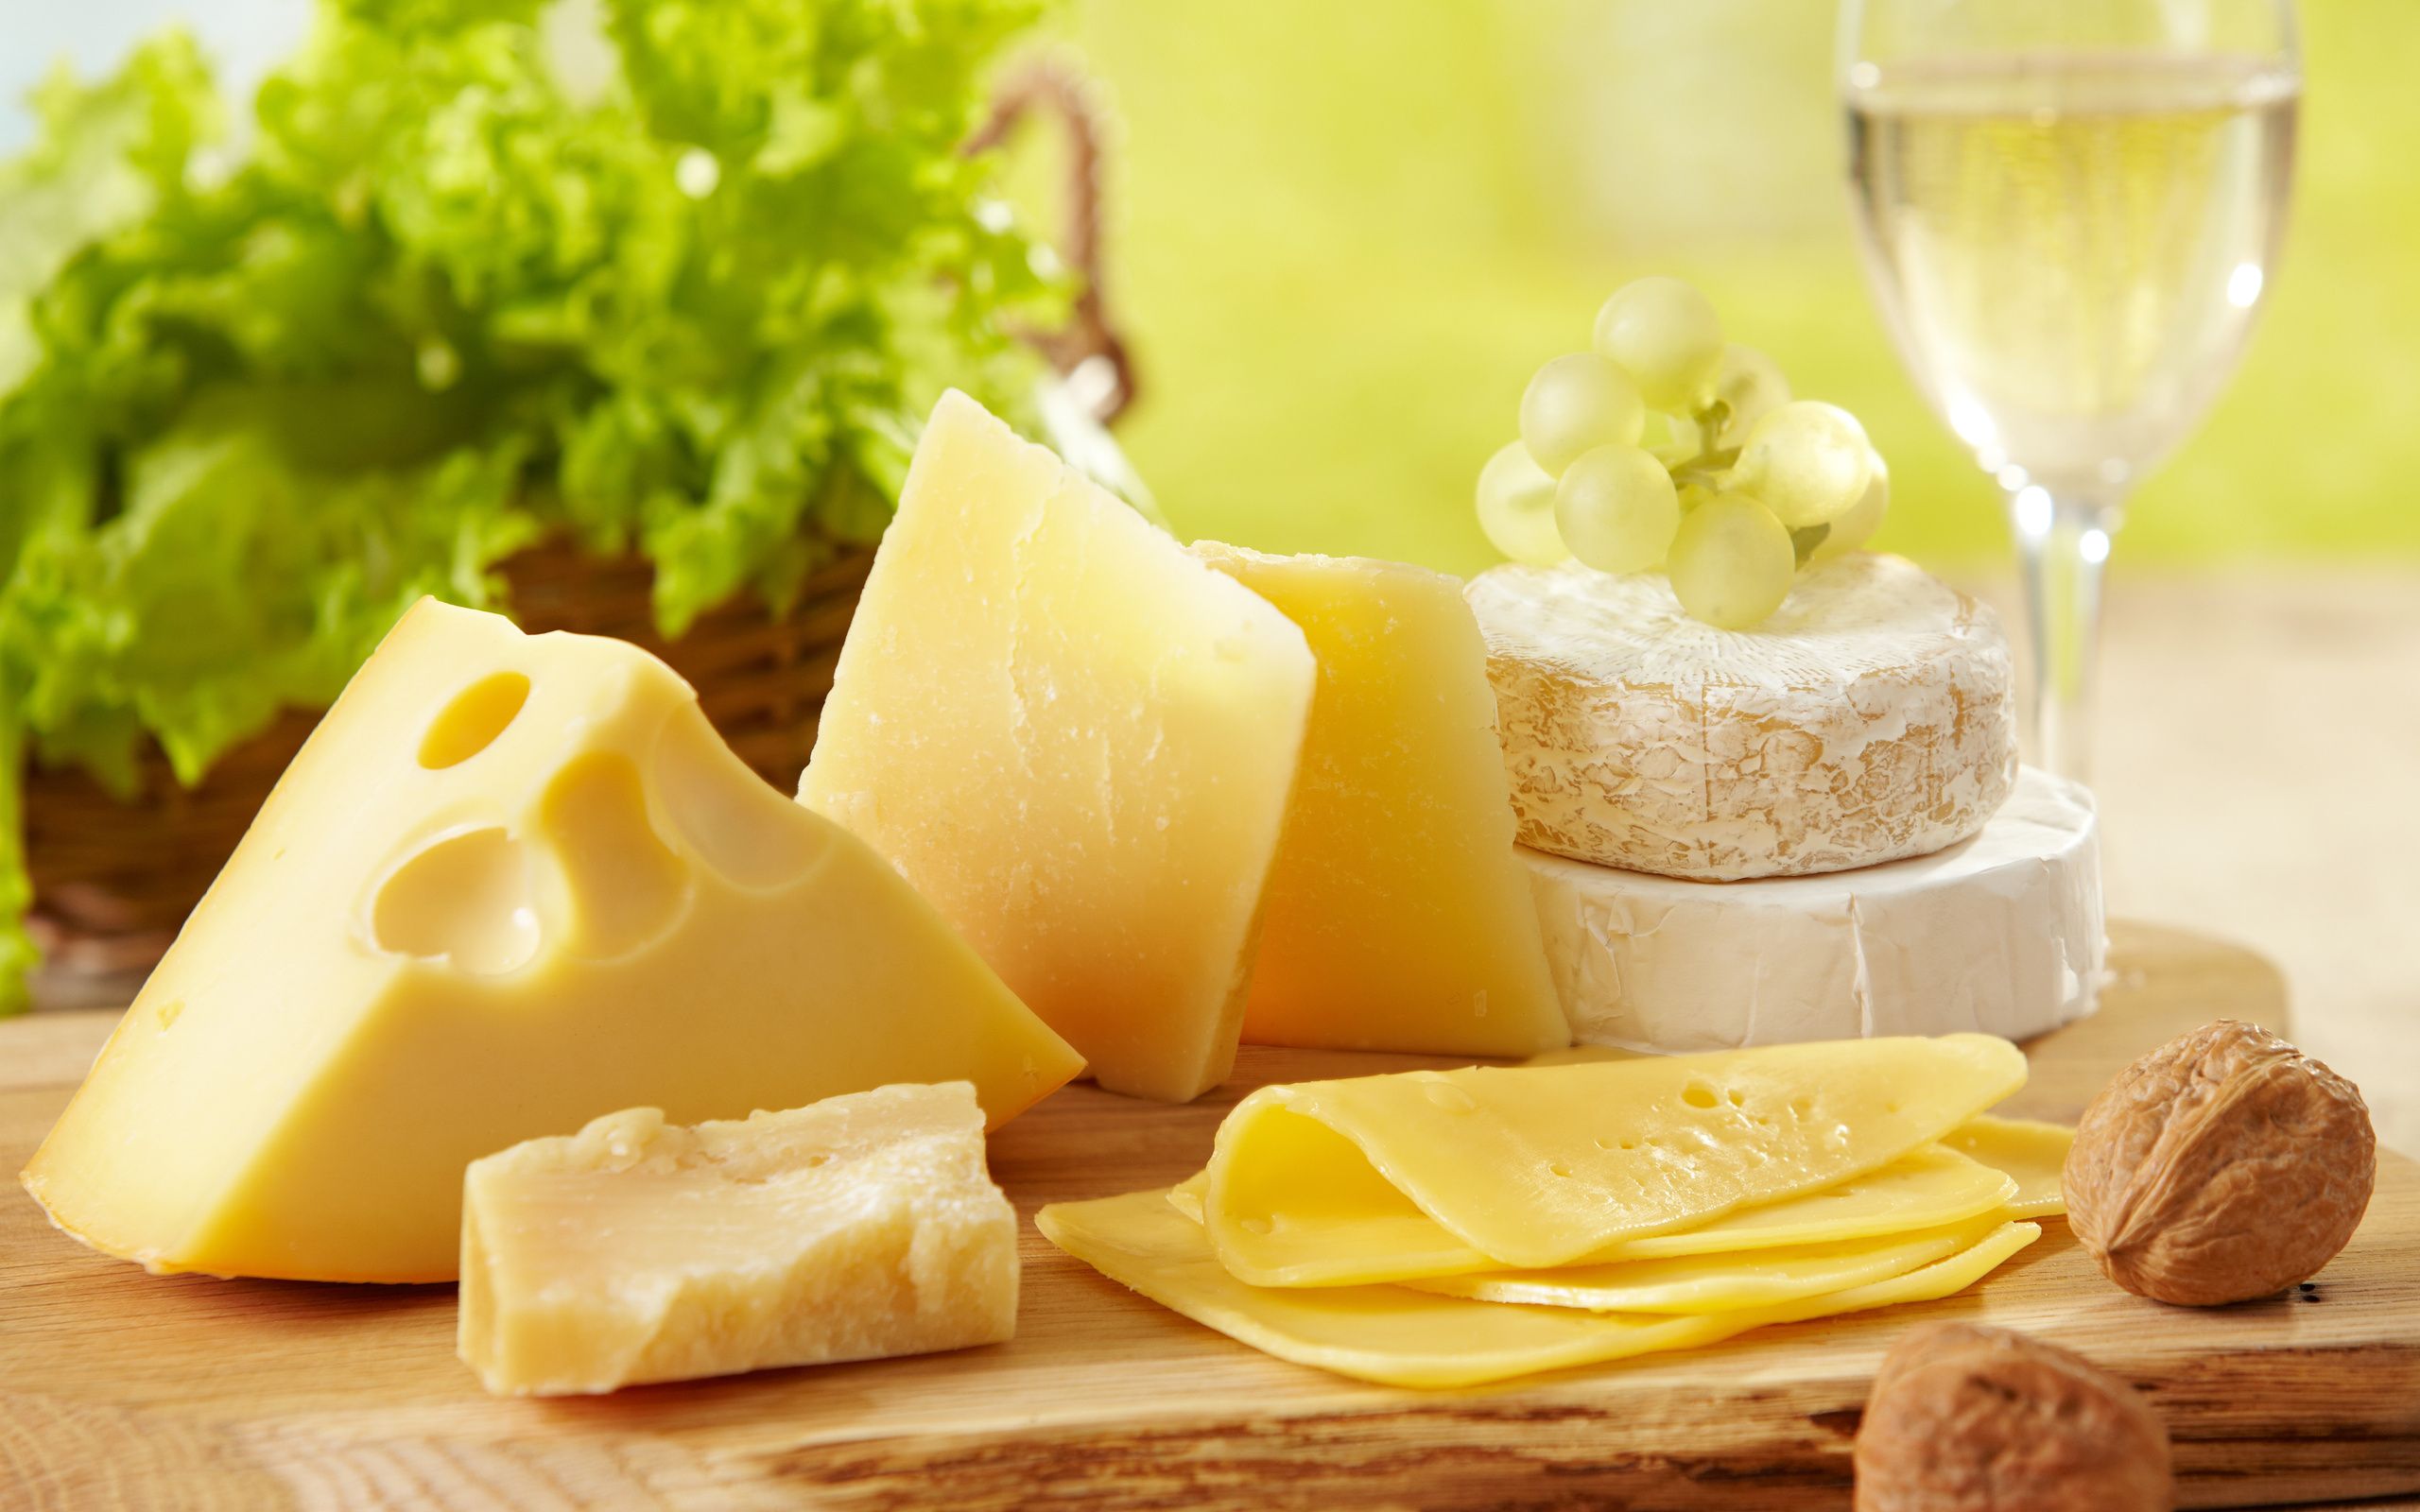 Cheese Wallpaper 42954 2560x1600px